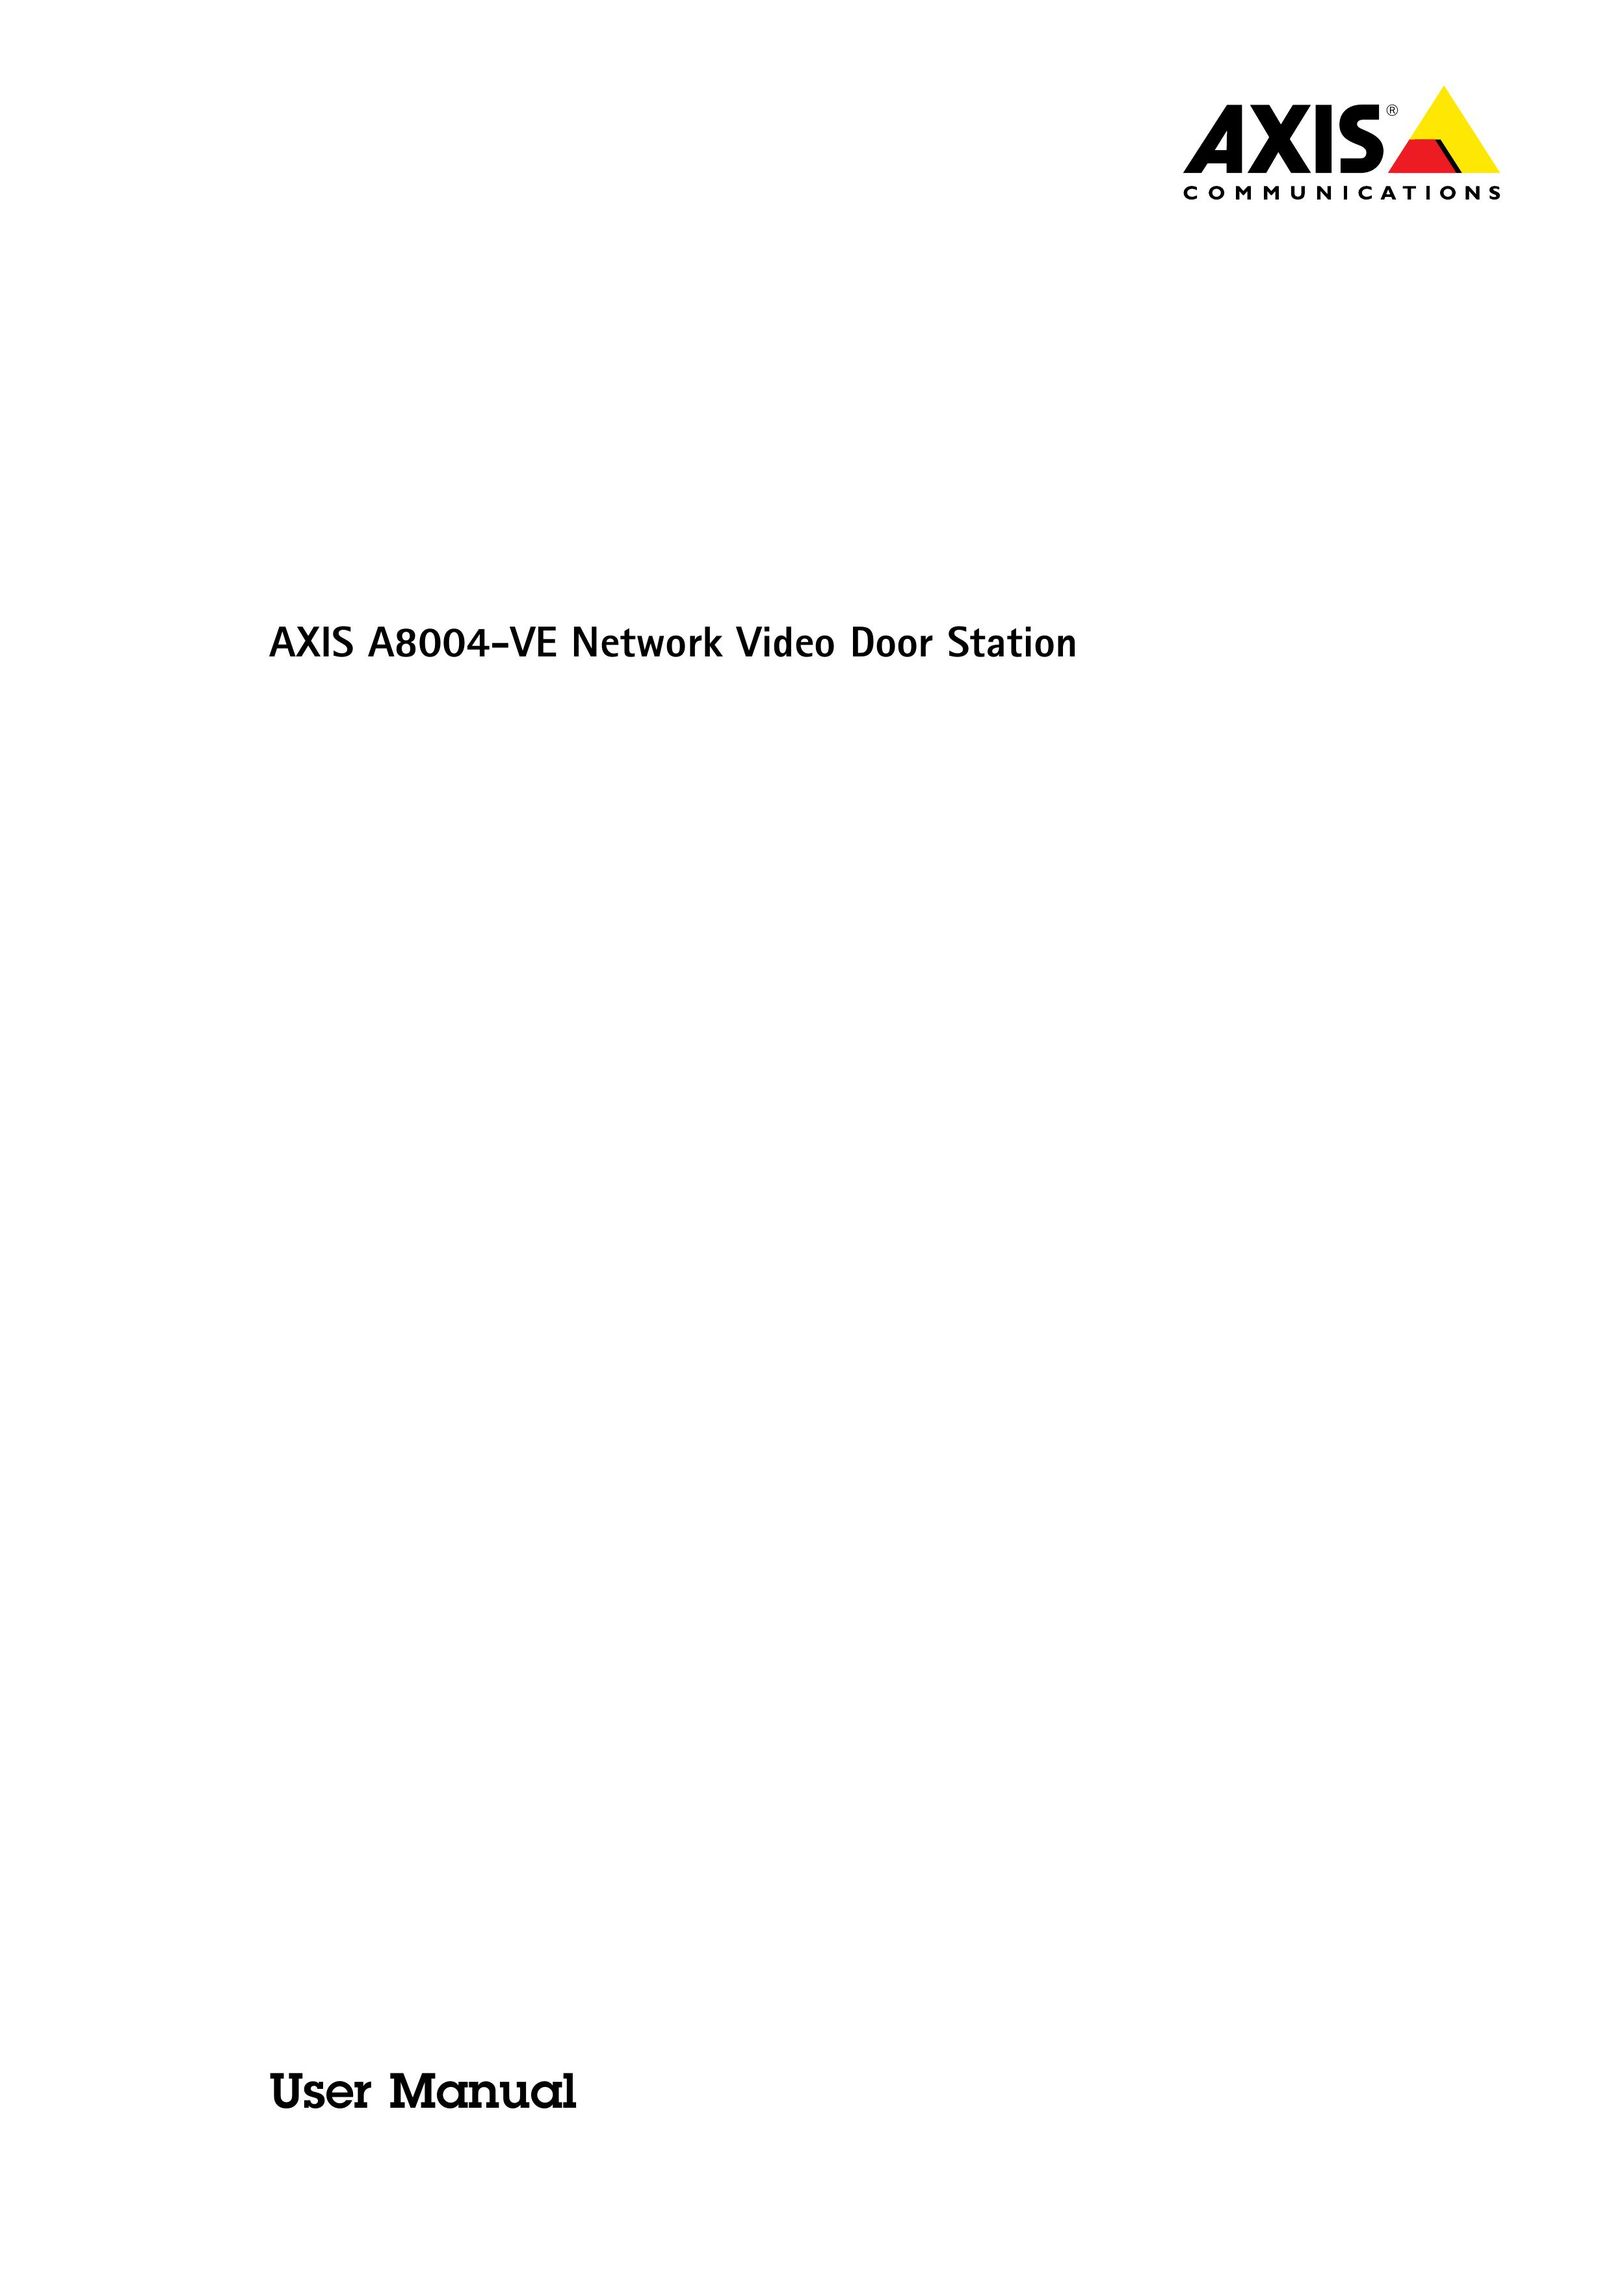 Axis Communications A8004-VE Intercom System User Manual